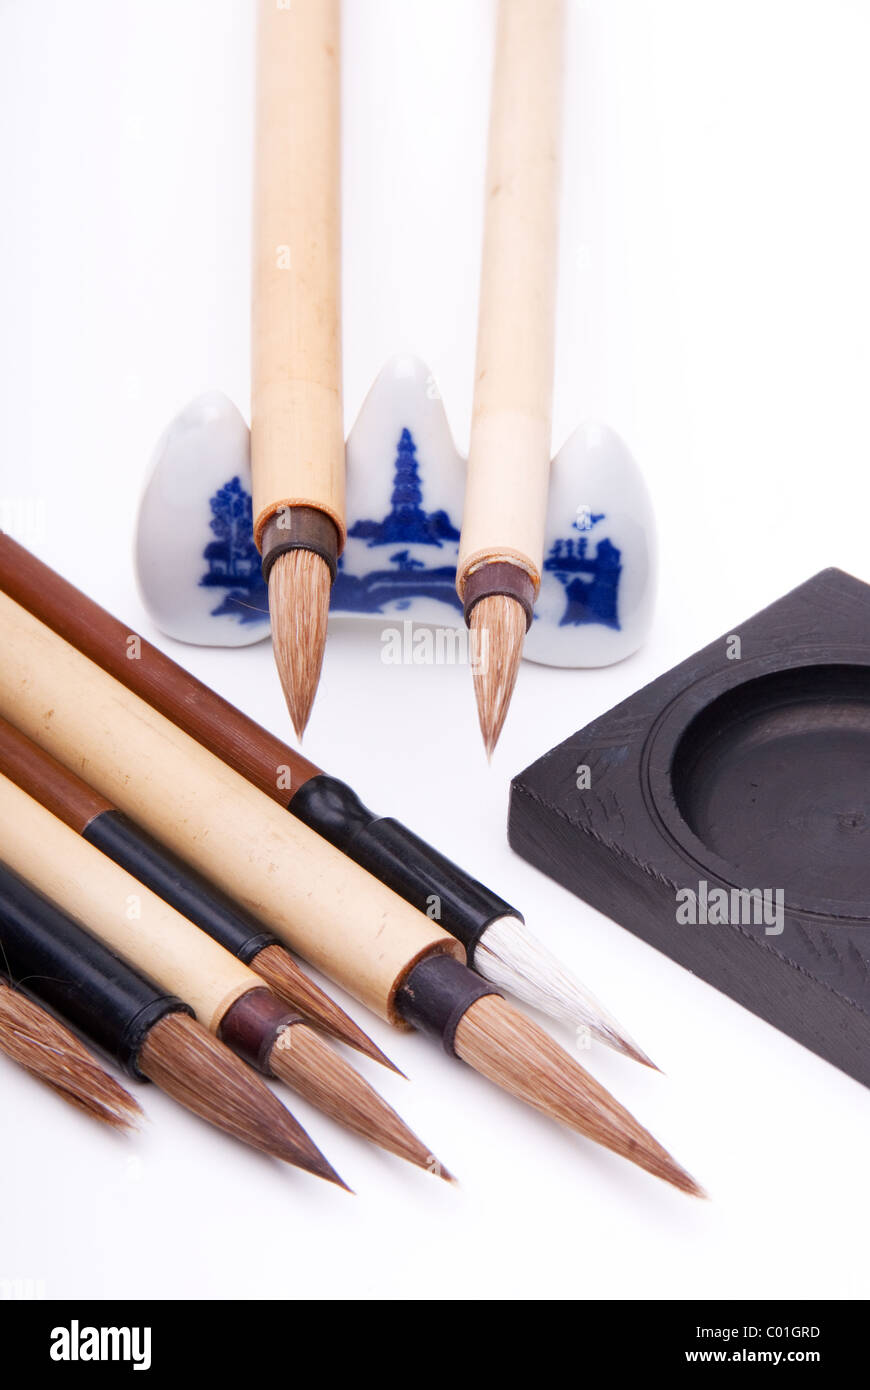 Chinese painting brushes with ink stone and porcelain rest. Stock Photo